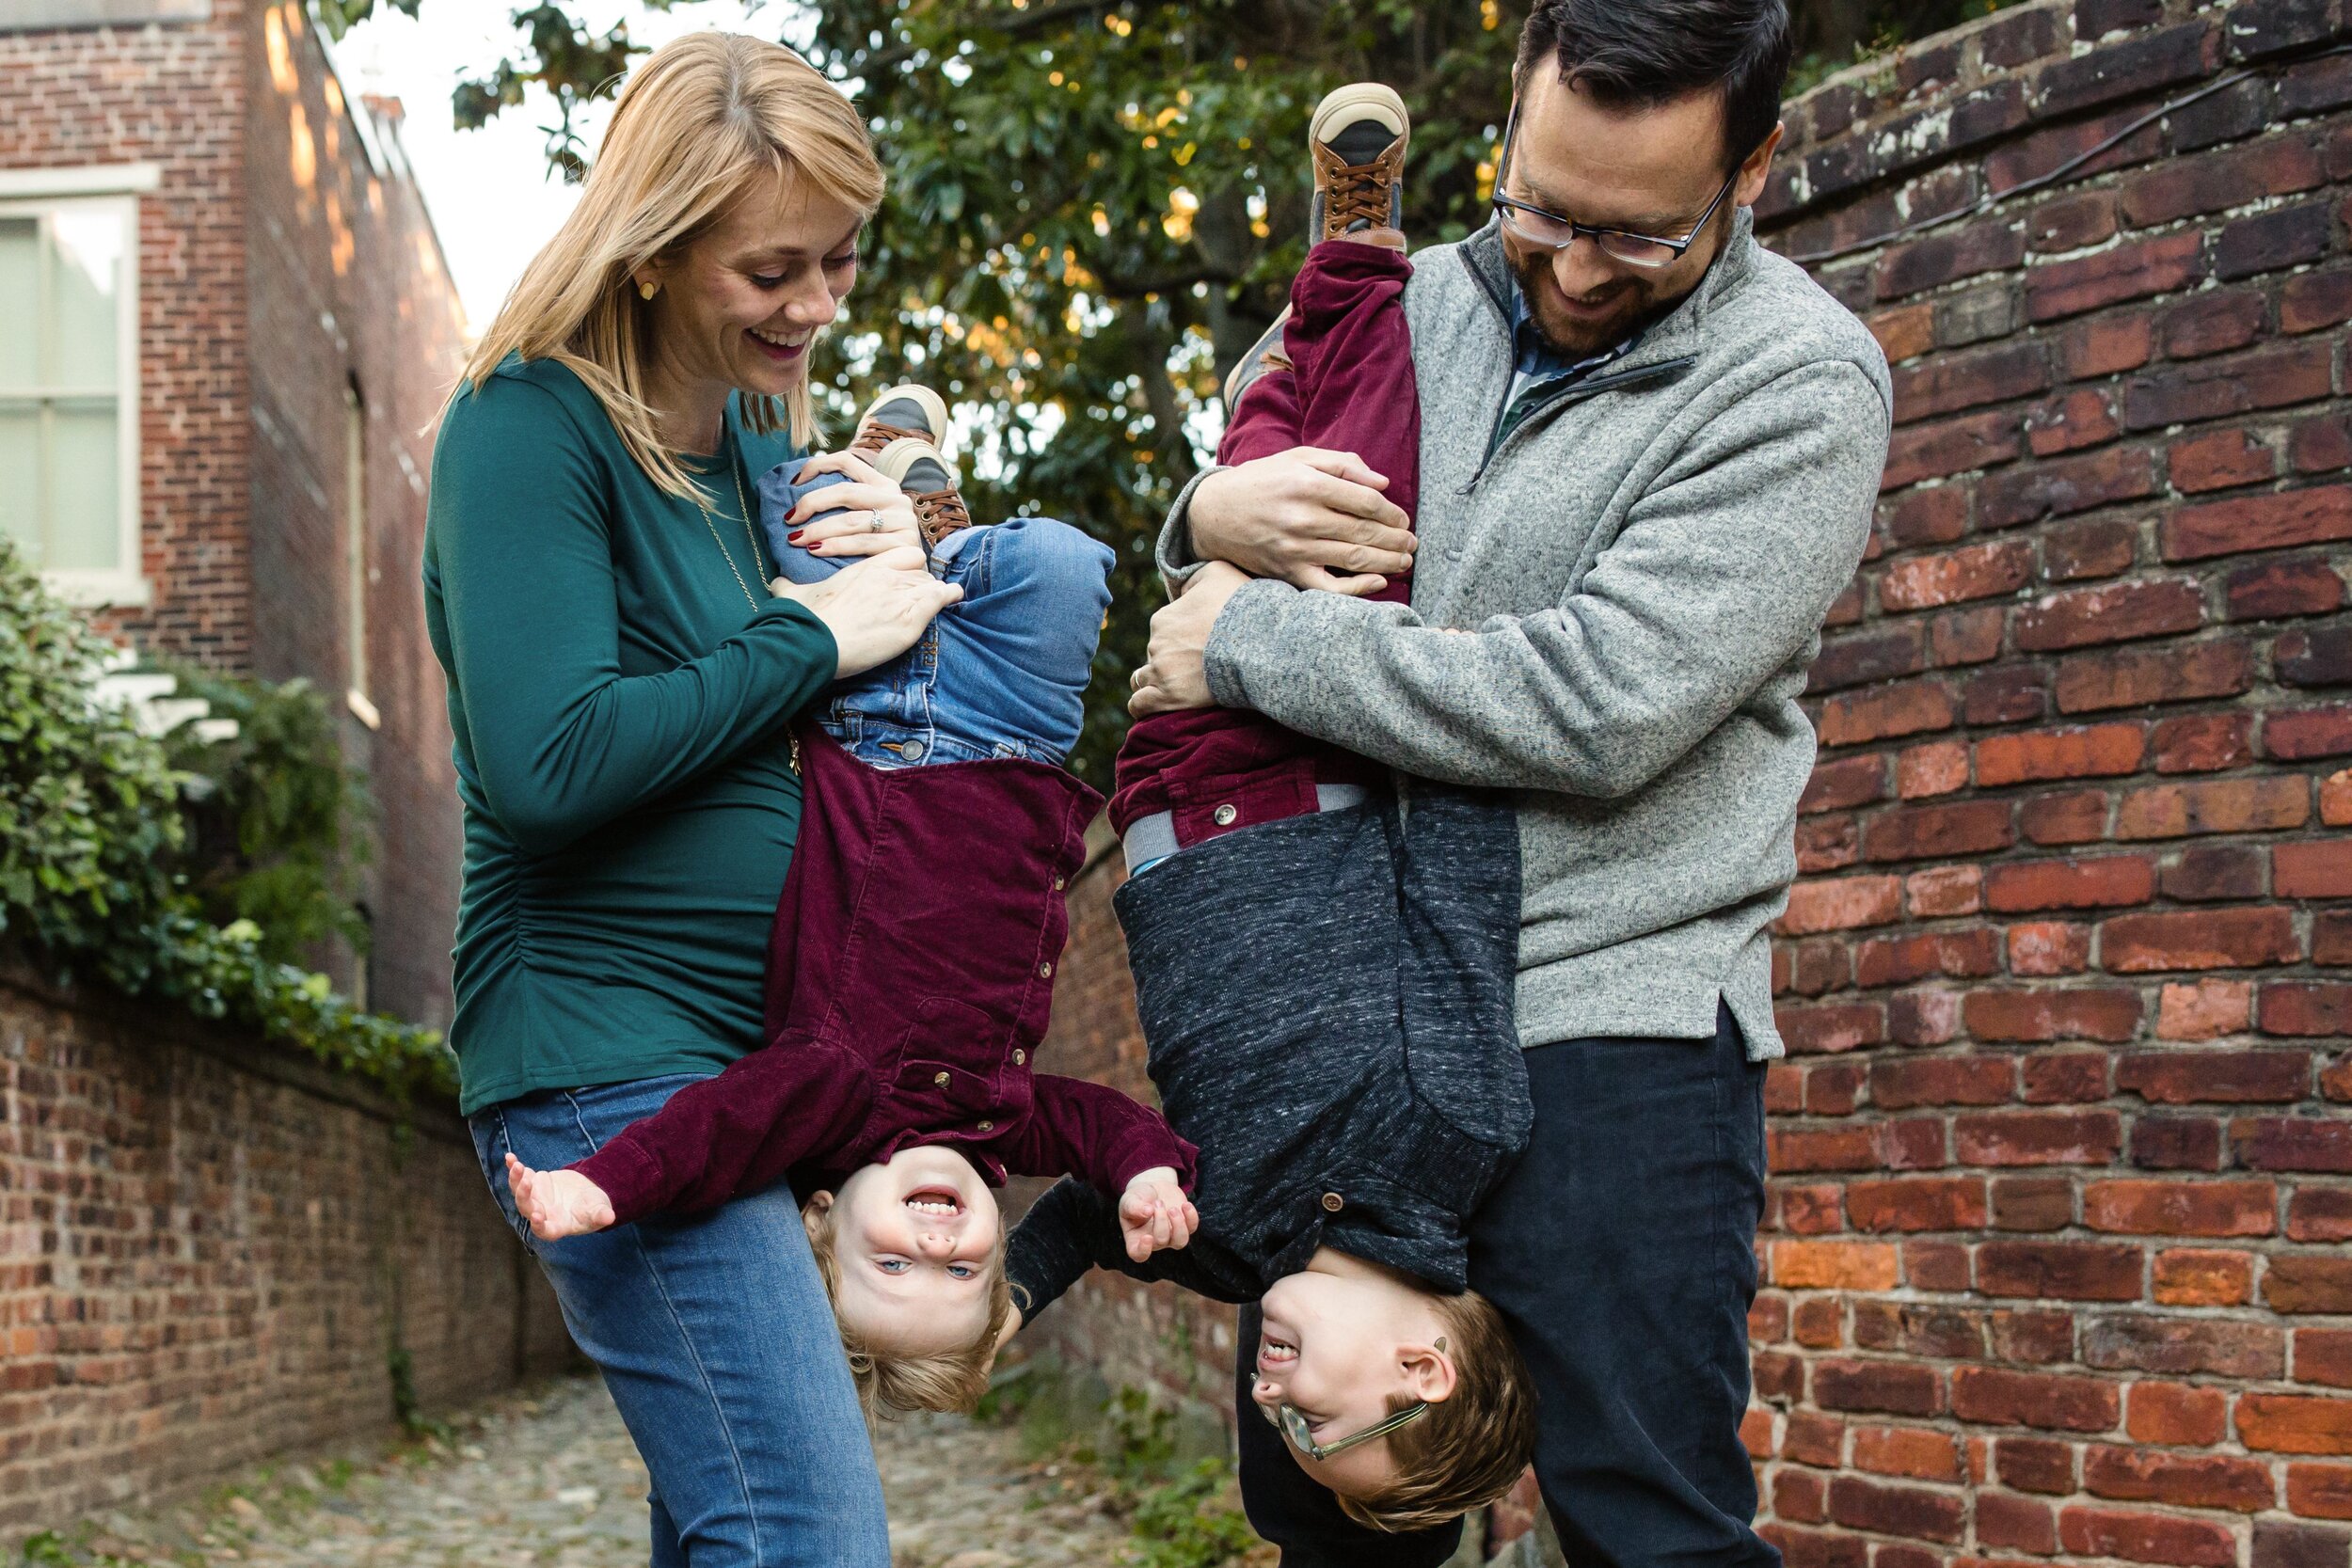 family-photo-with-kids-upside-down.jpg